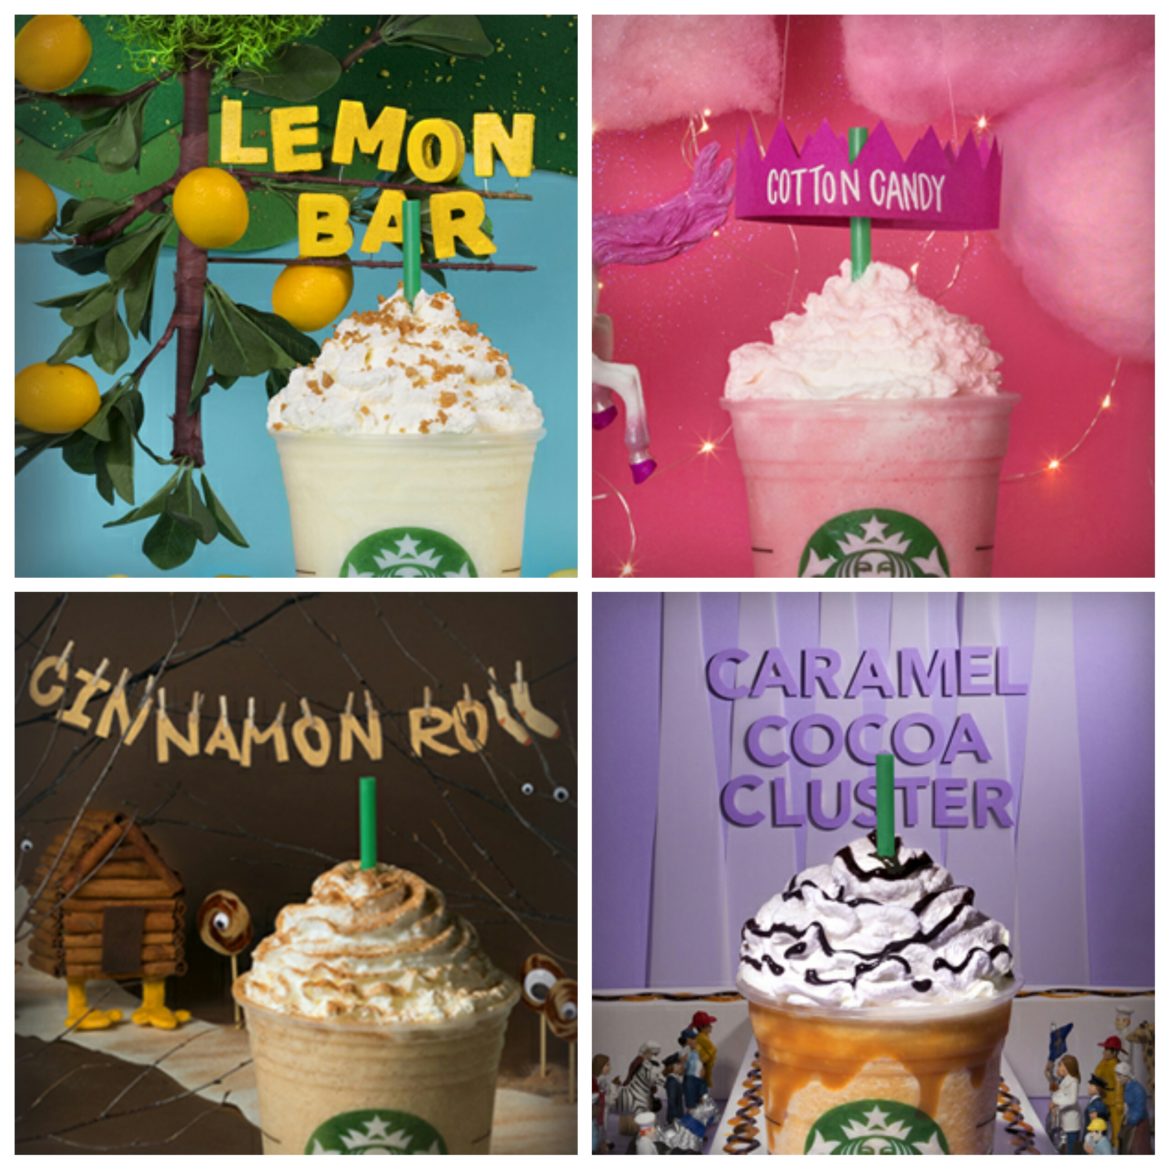 Starbucks Introducing 6 New Frappuccinos on June 8th